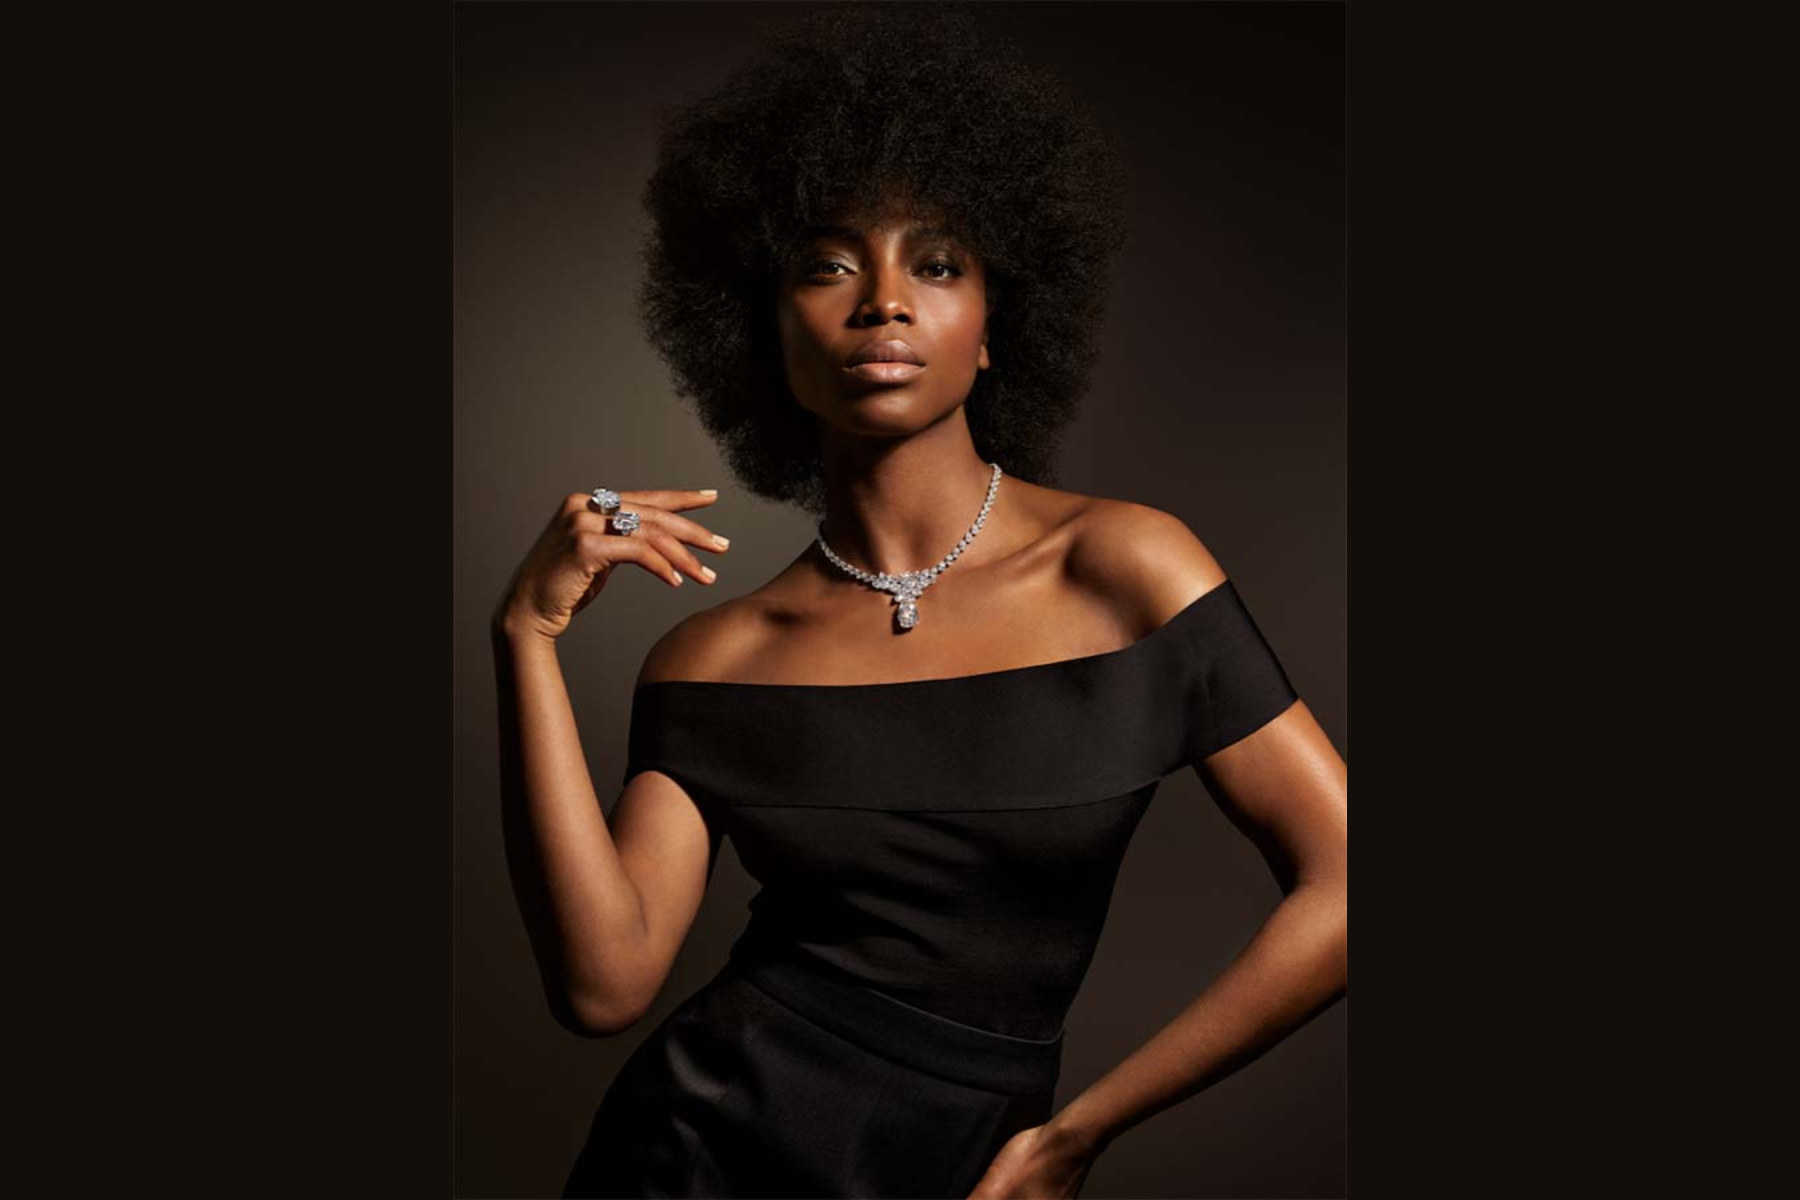 A stunning black woman wearing 13.69-carat flawless D color diamond necklace while posing